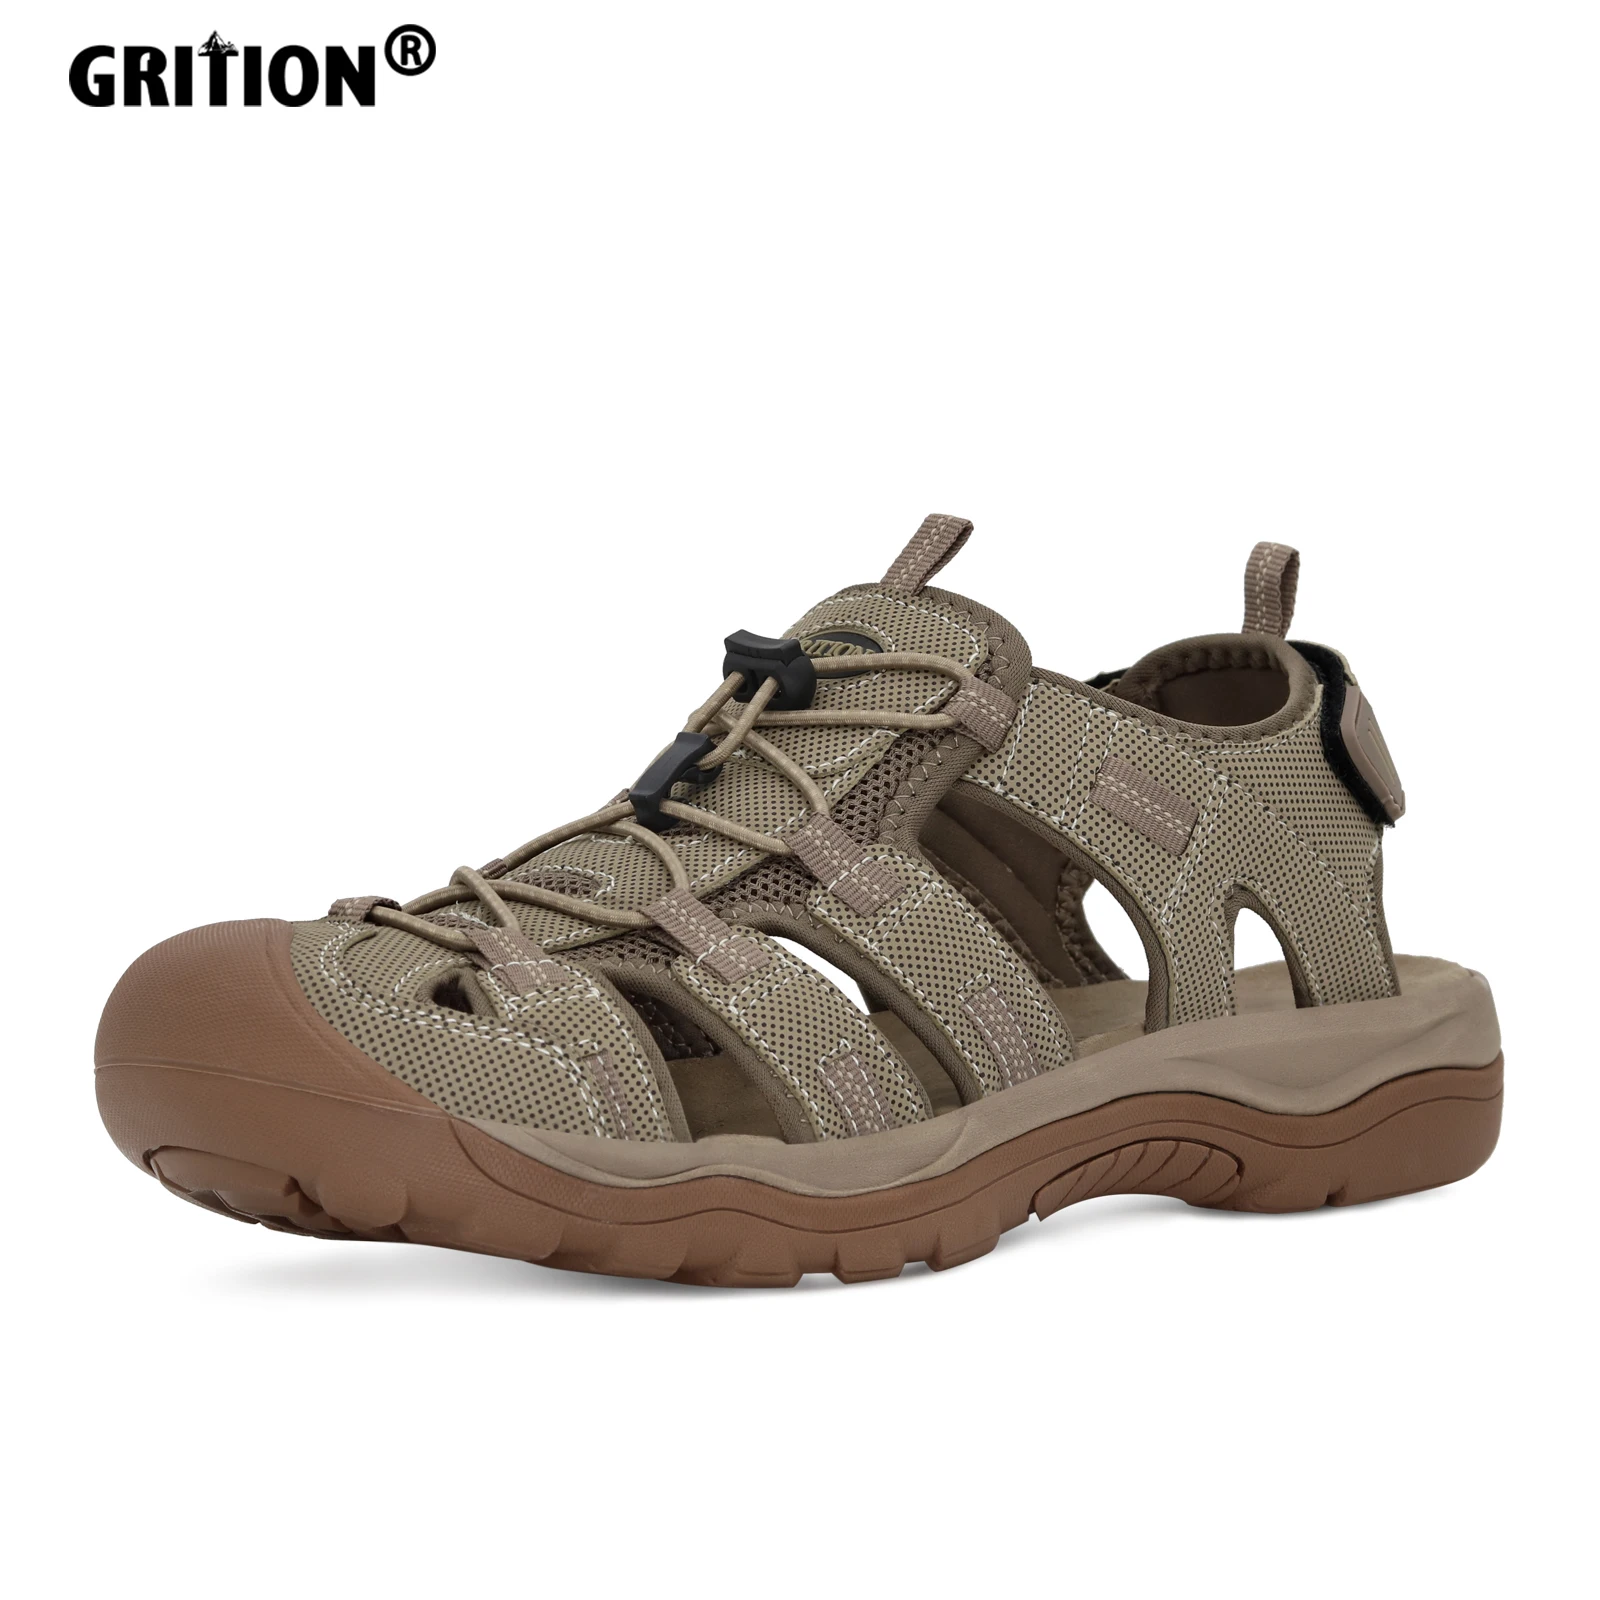 GRITION Men Sandals With High Quality Well Made Beach Seaside Original Design Wearable Balance Brand Closed Toe Shoes 2022 New